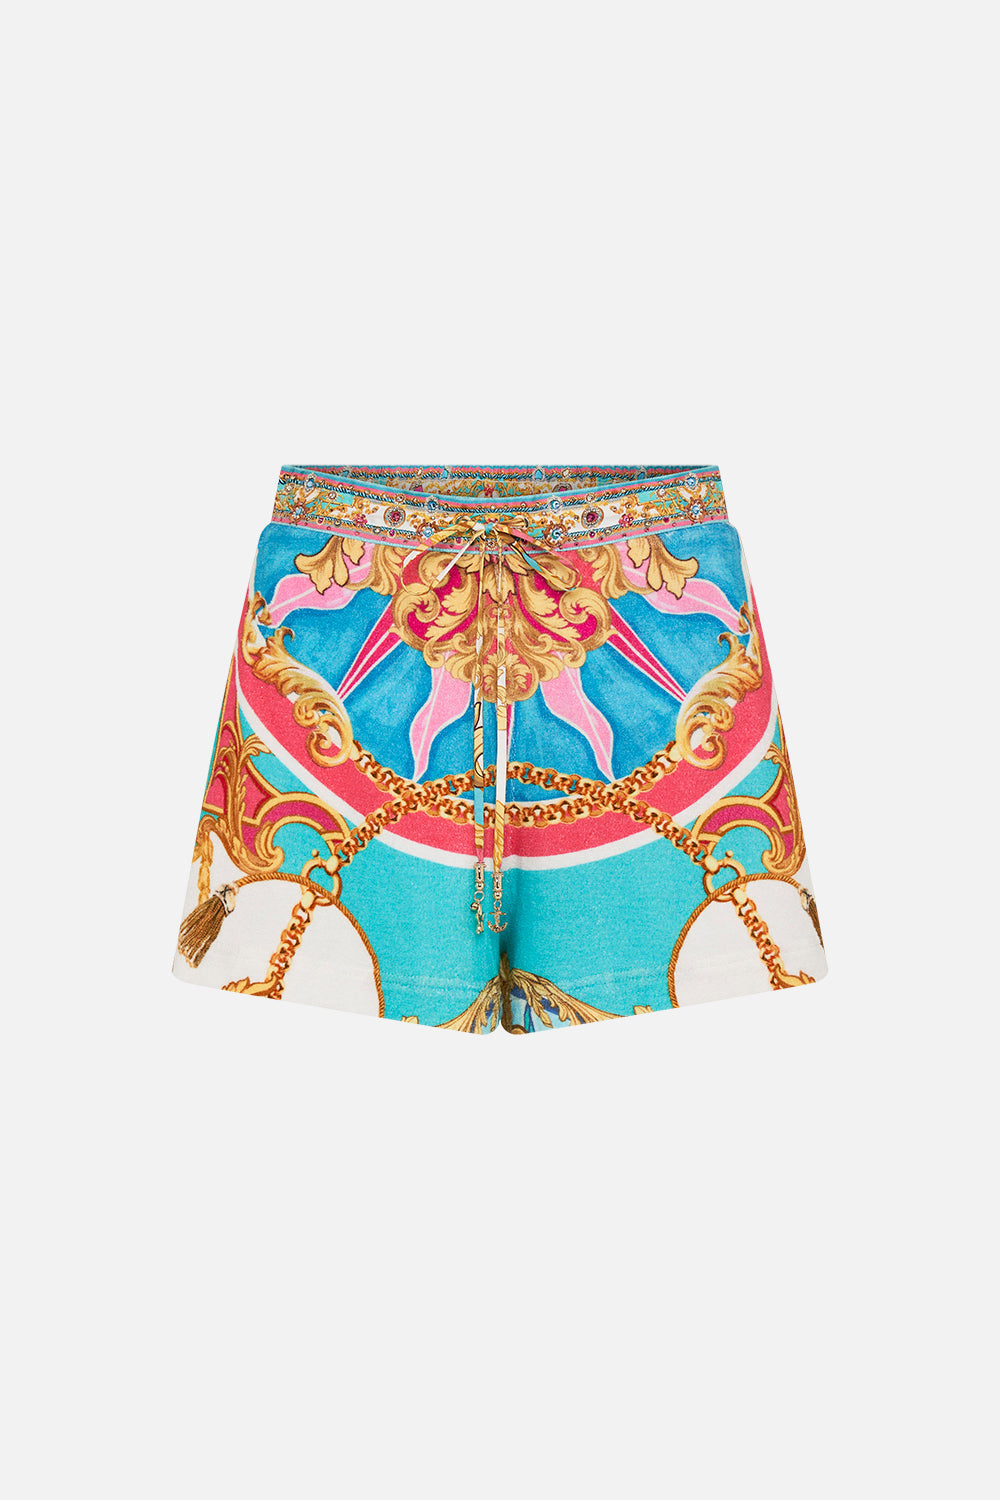 Product view of  CAMILLA silk boxer short in Sail Away With Me print 